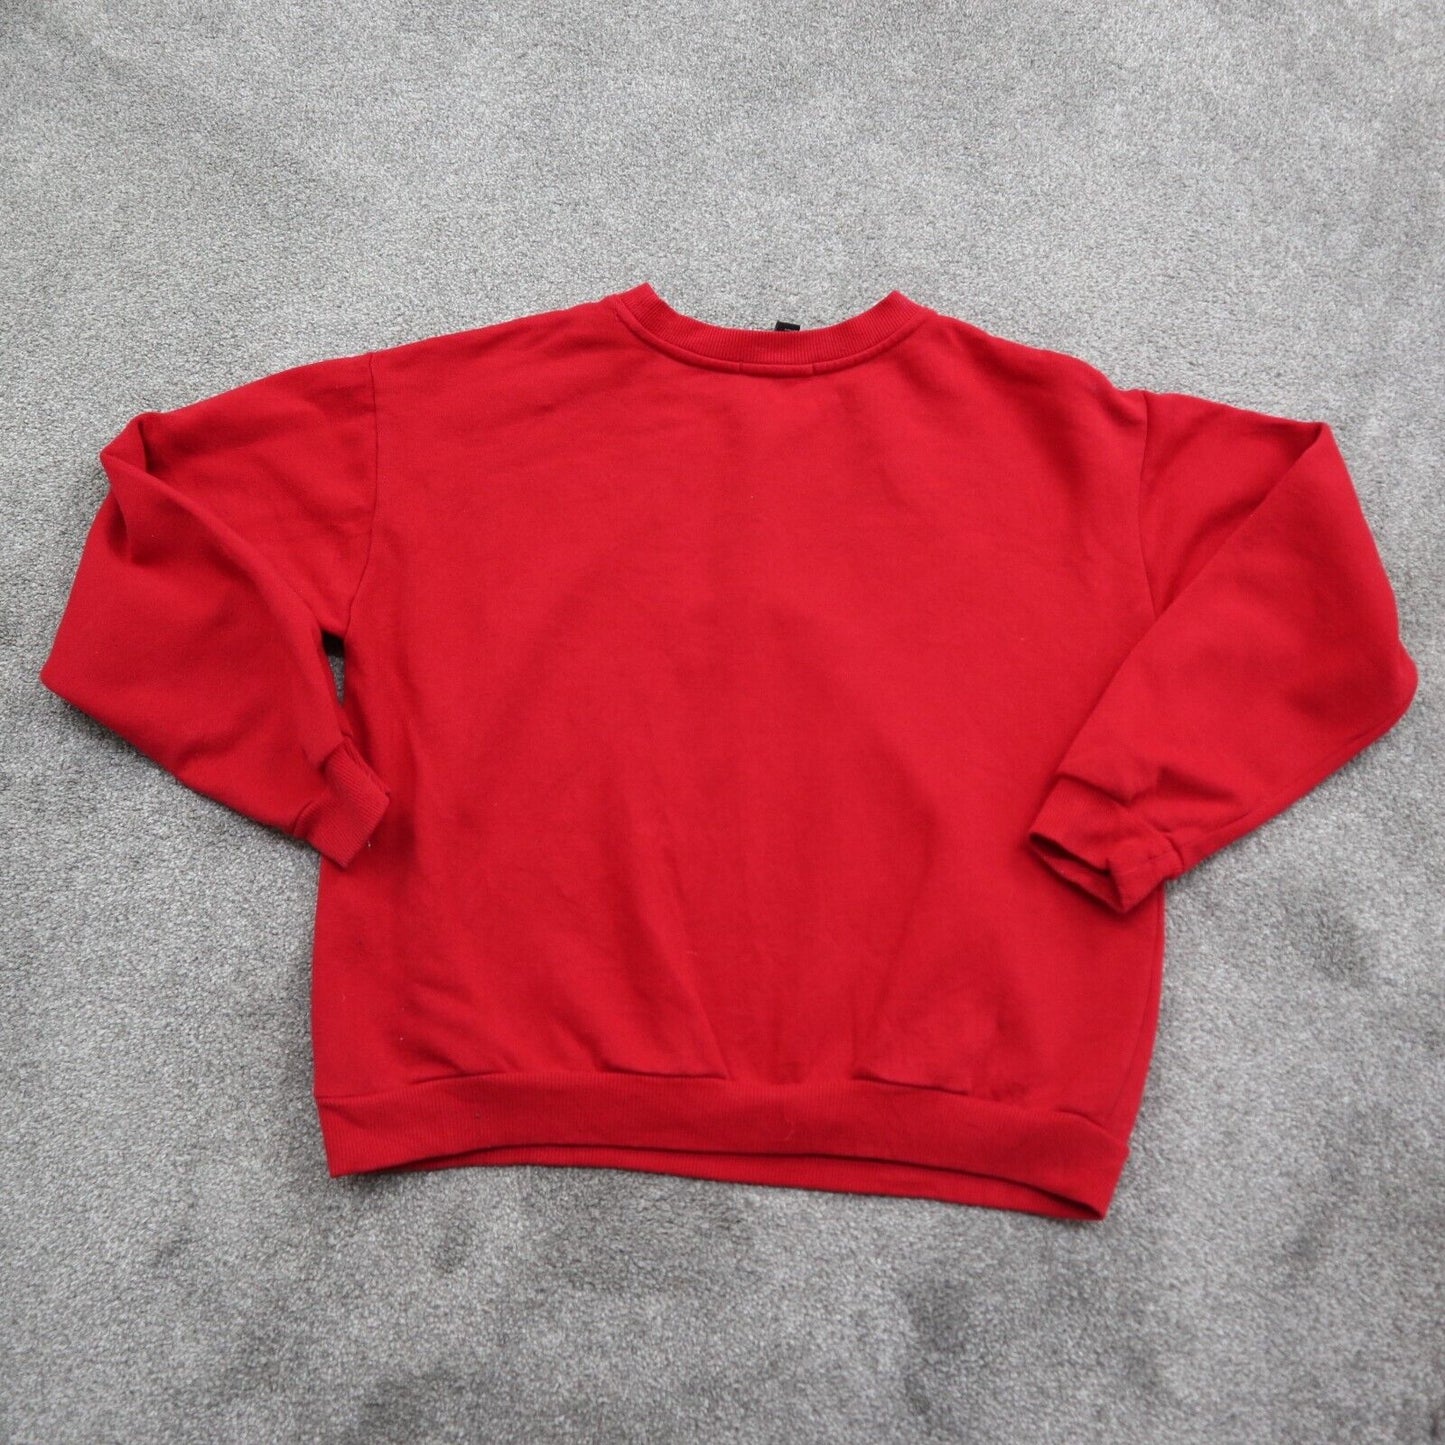 Forever 2 Womens Pullover Sweatshirt Long Sleeve Crew Neck Red Size Small Petite